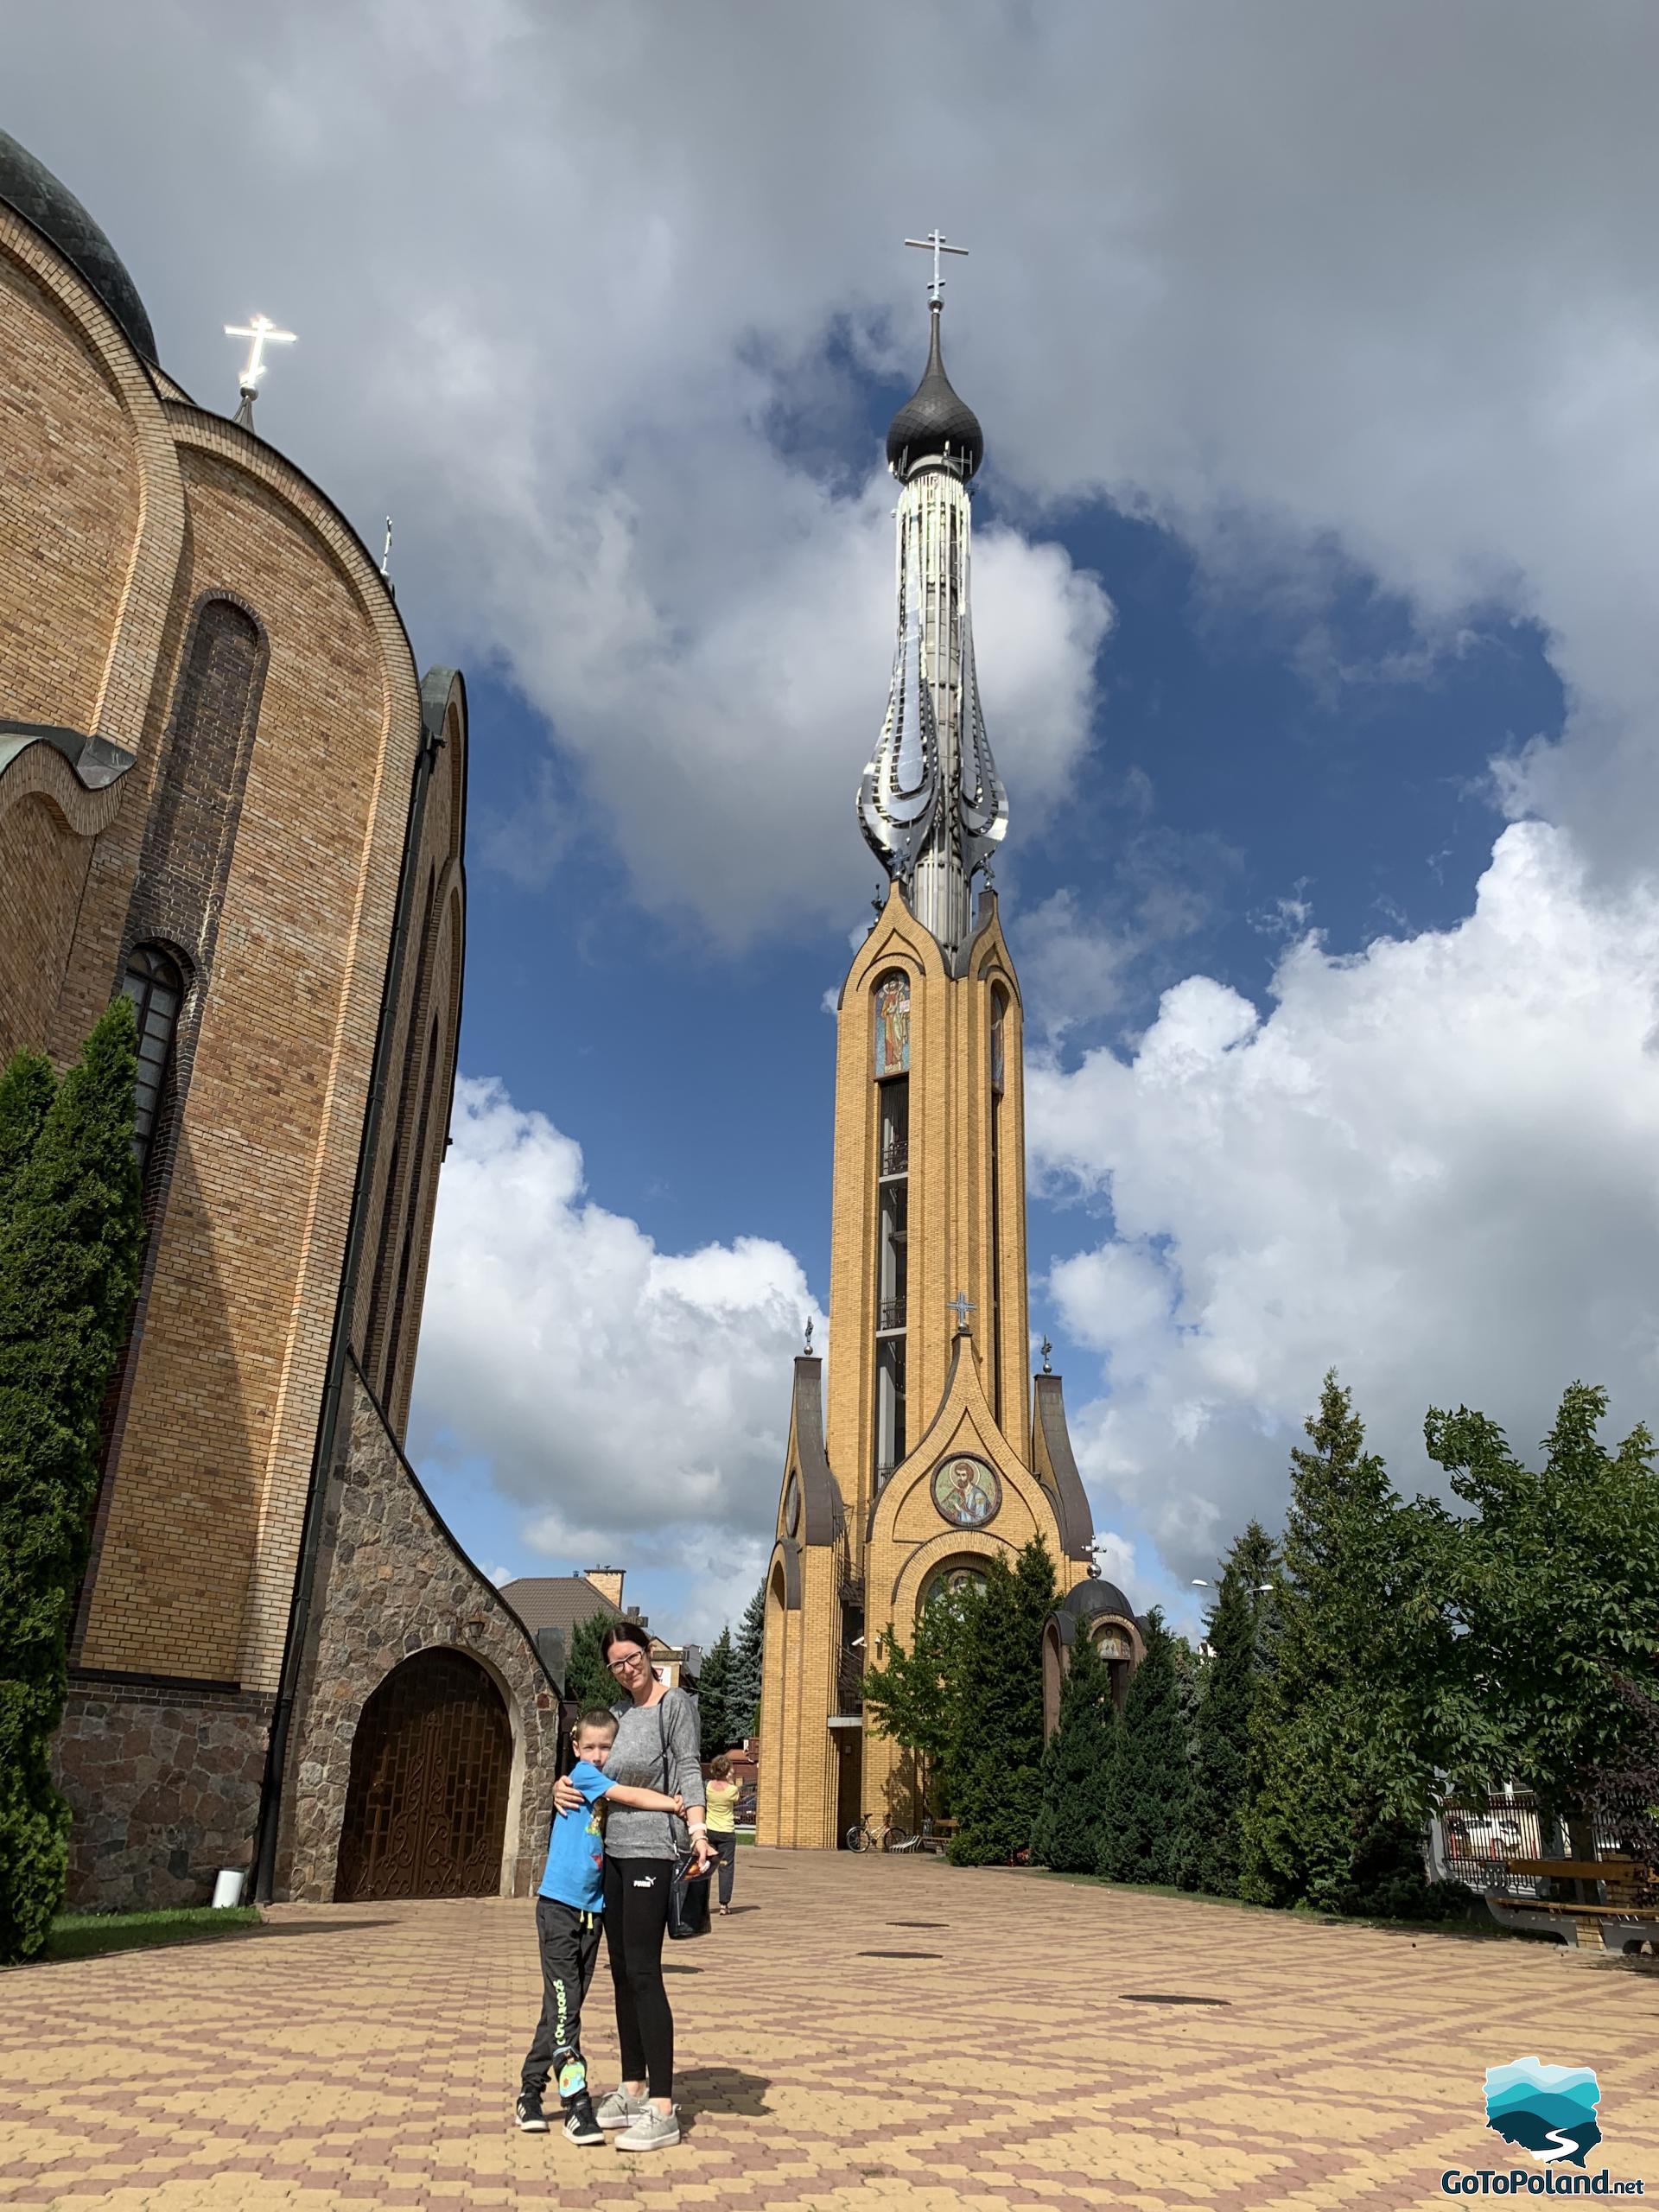 a woman and a boy are near the huge orthodox church, behind them there is a big tower